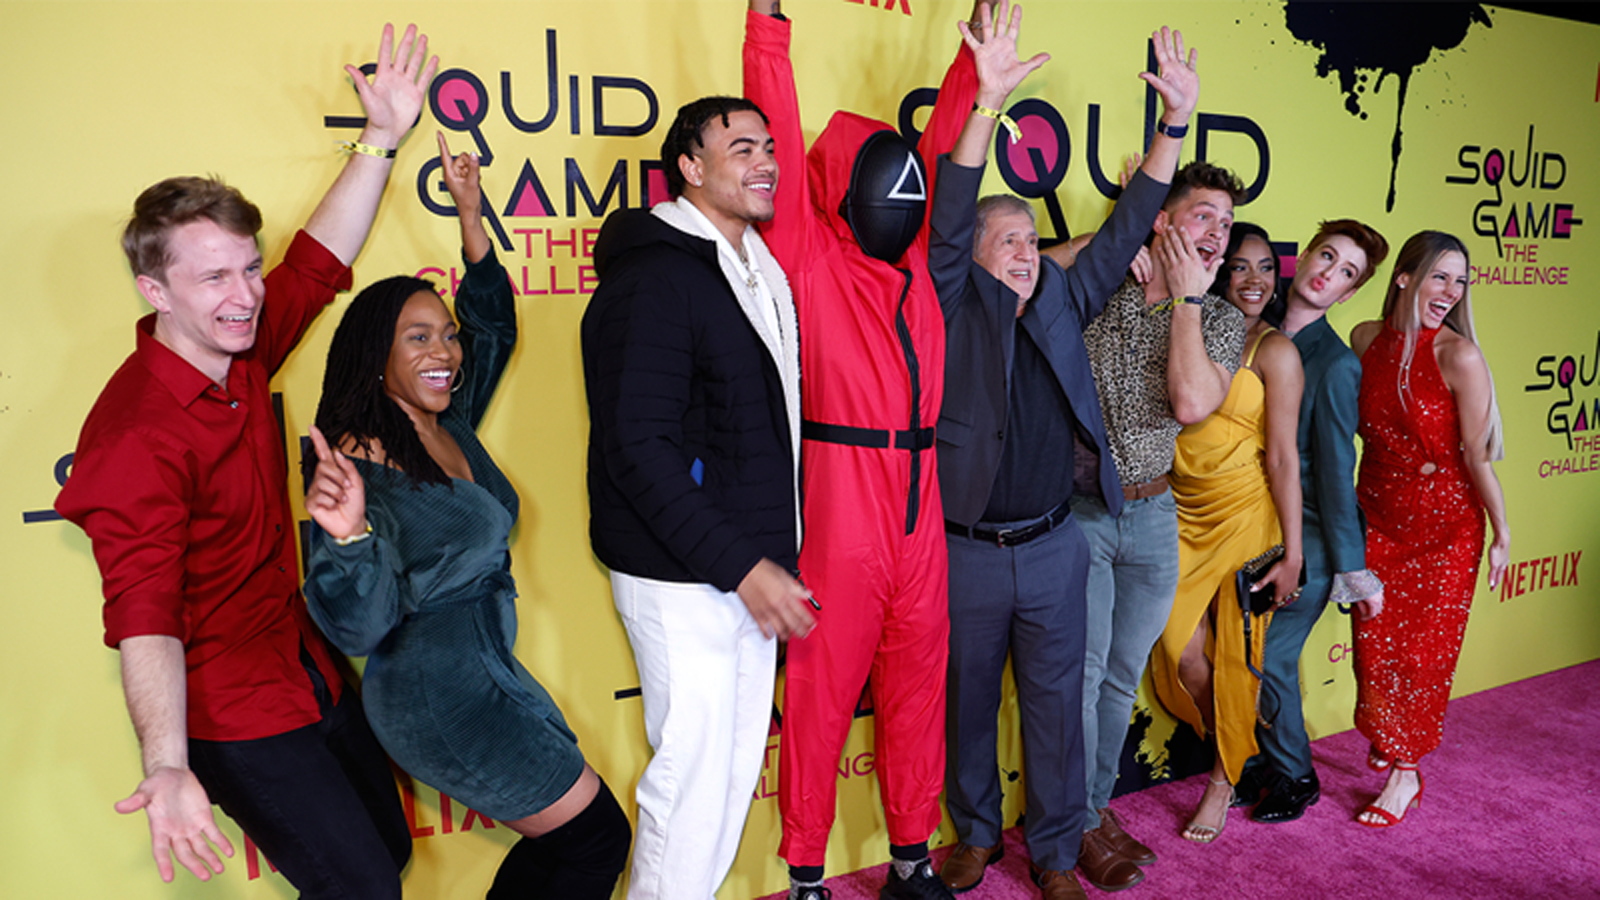 How to watch 'Squid Game: The Challenge' season 1 finale